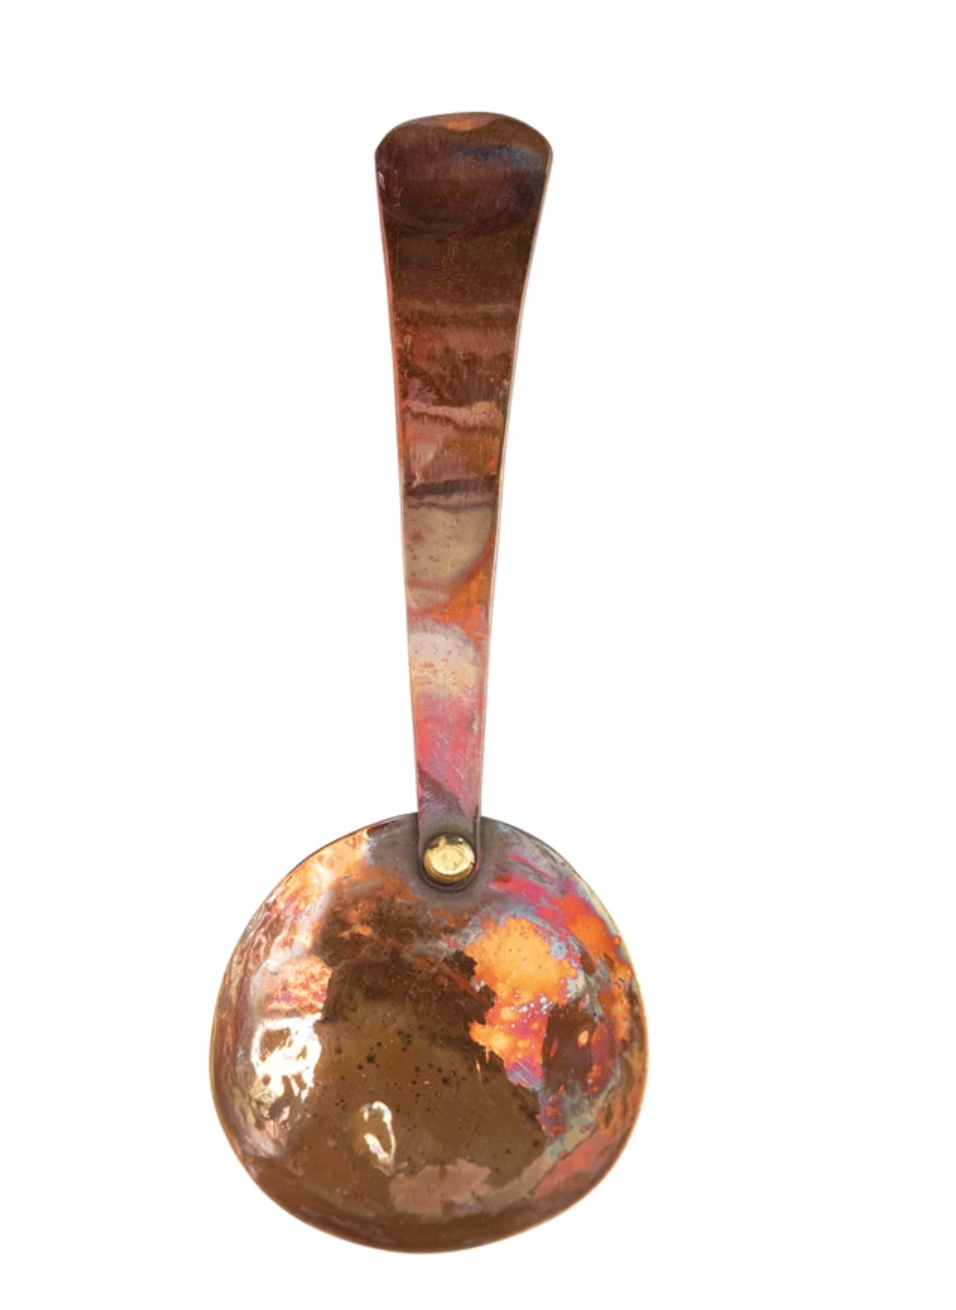 Hammered Copper Spoon with Burnt Finish